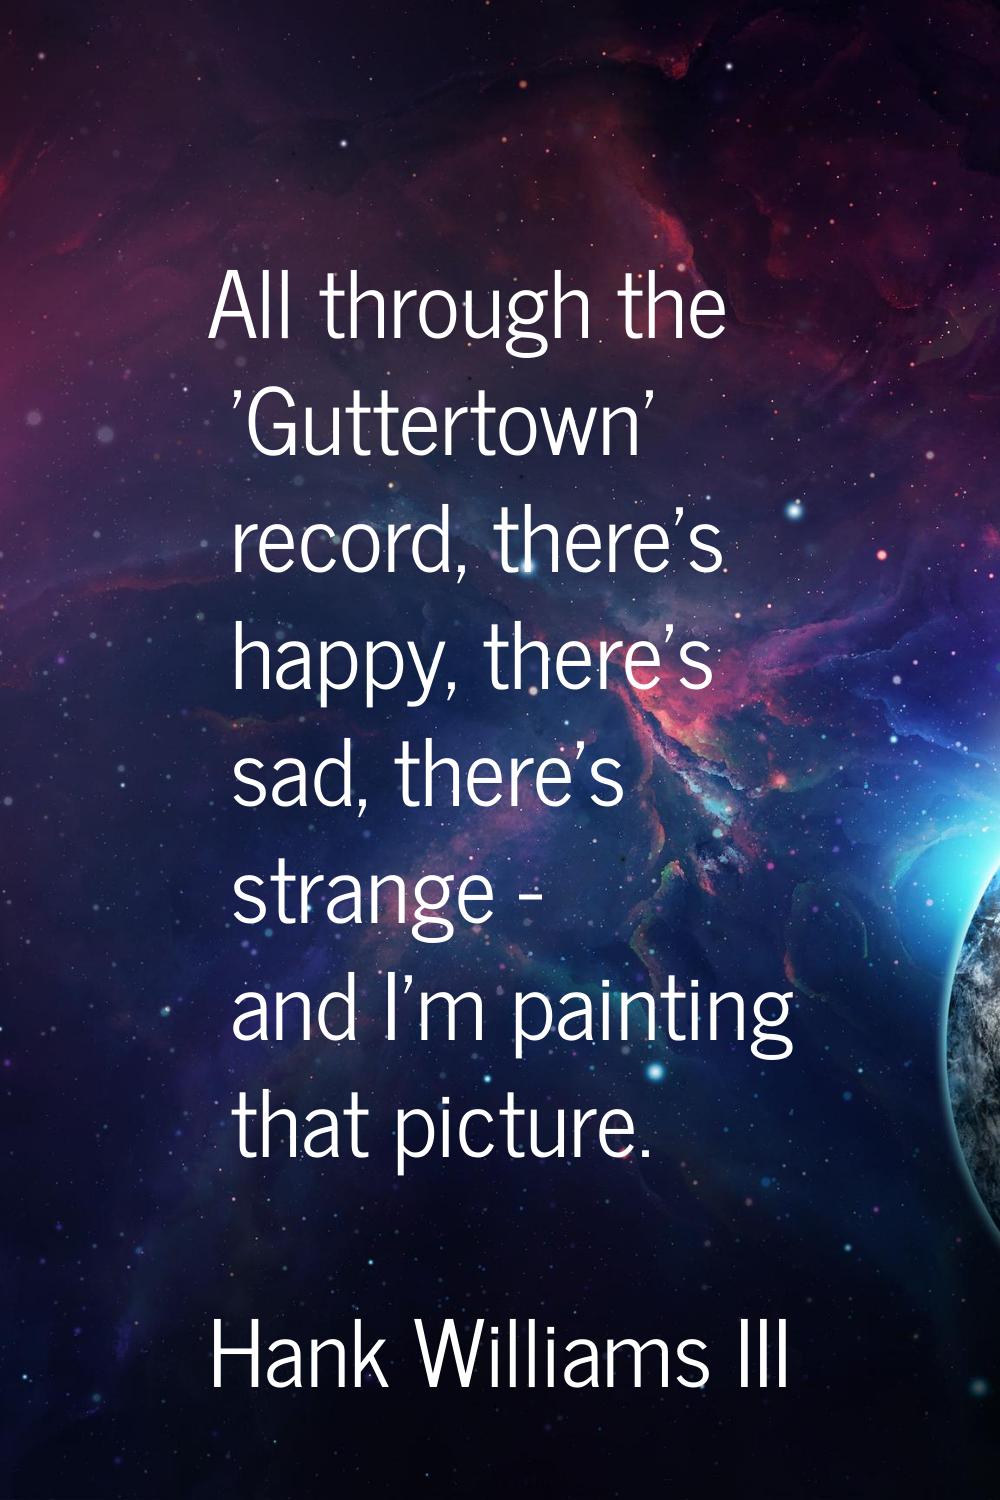 All through the 'Guttertown' record, there's happy, there's sad, there's strange - and I'm painting